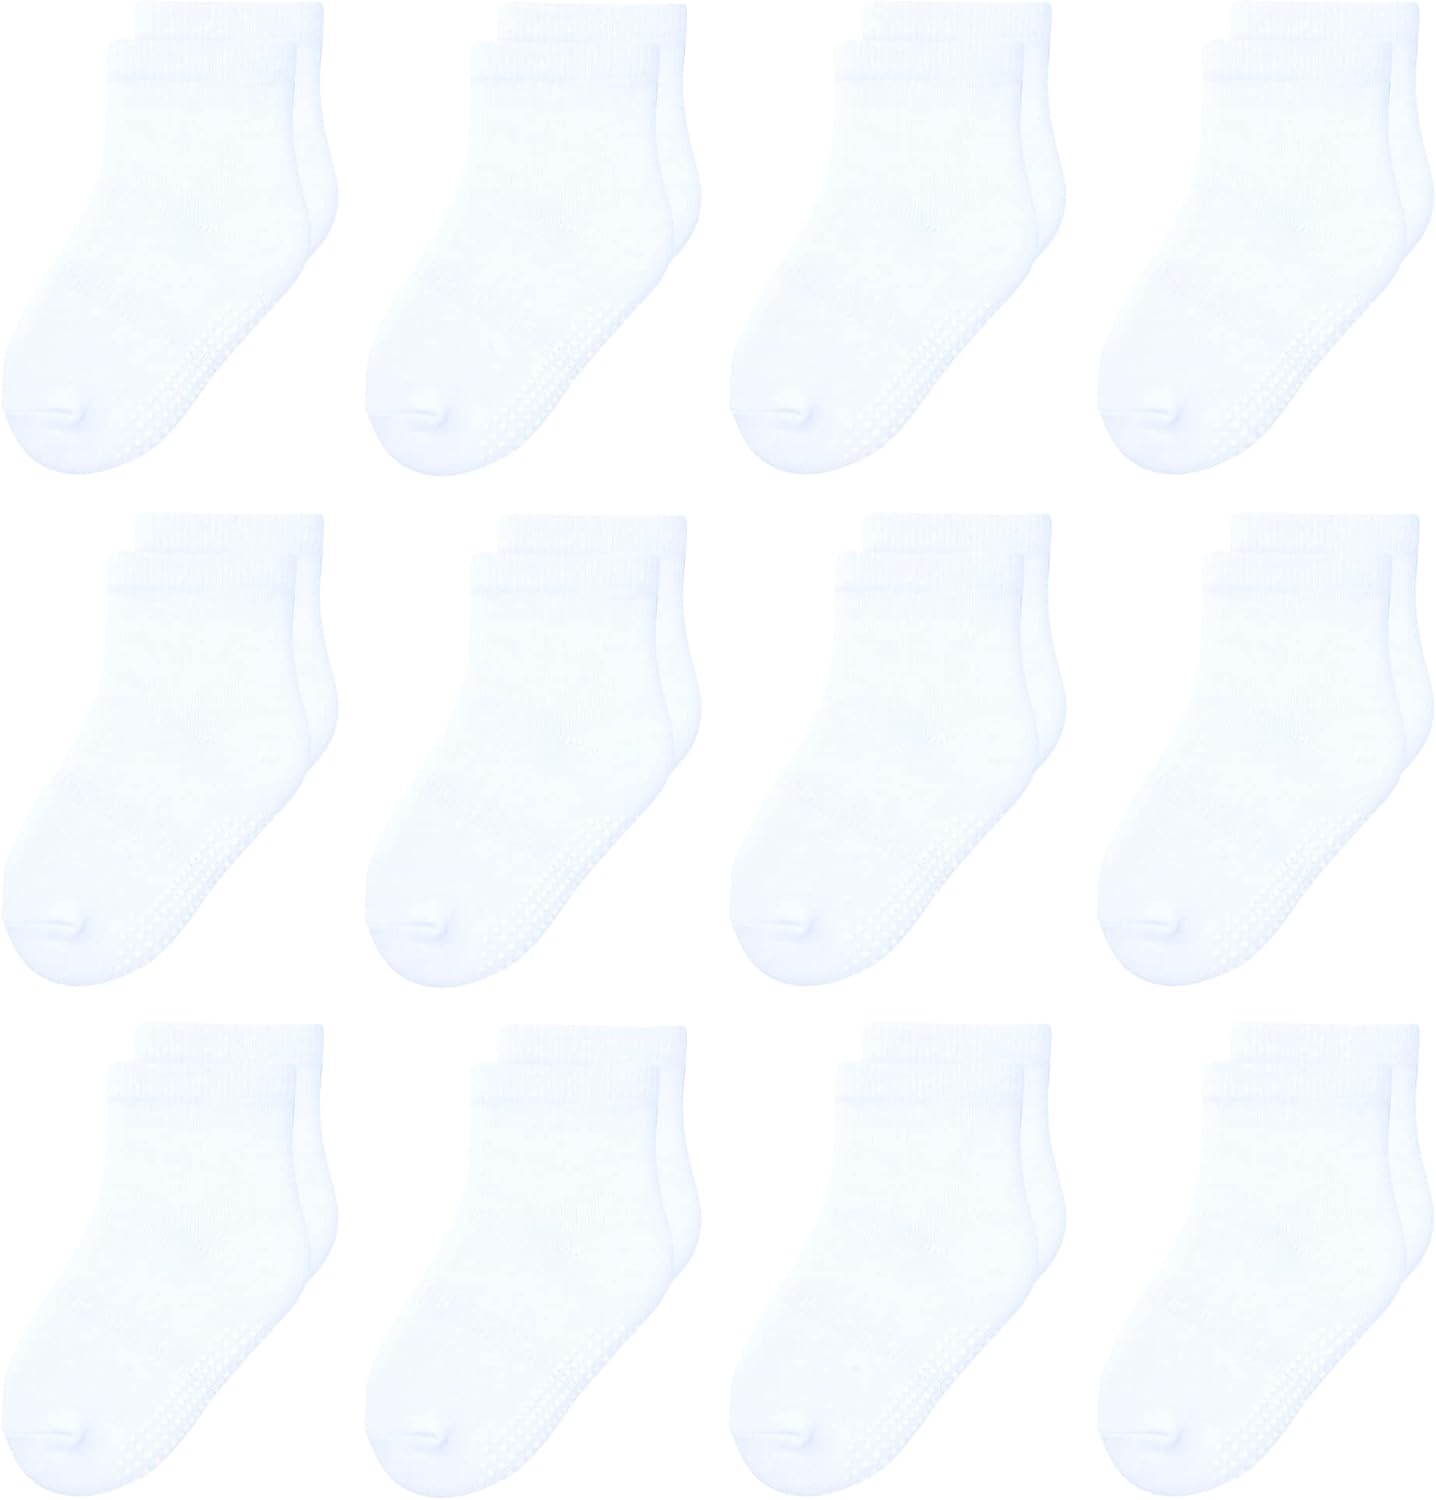 Limited-Time Promo! Save Up to 36% on HYzgb 12 Pack Non Slip Kids Toddler Baby Socks